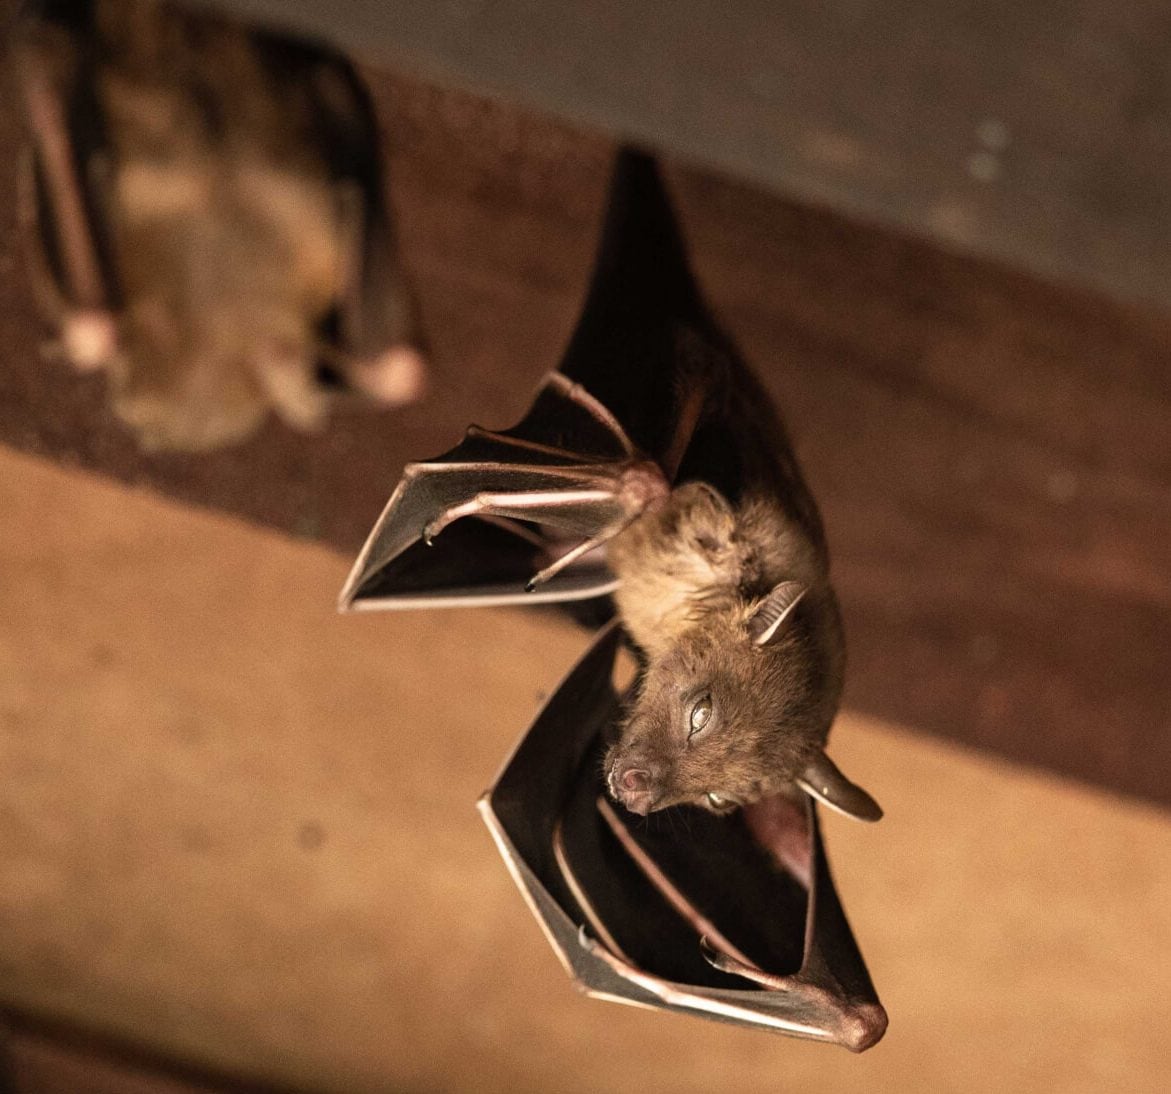 Expert bat removal services for a safe and humane solution in Spokane